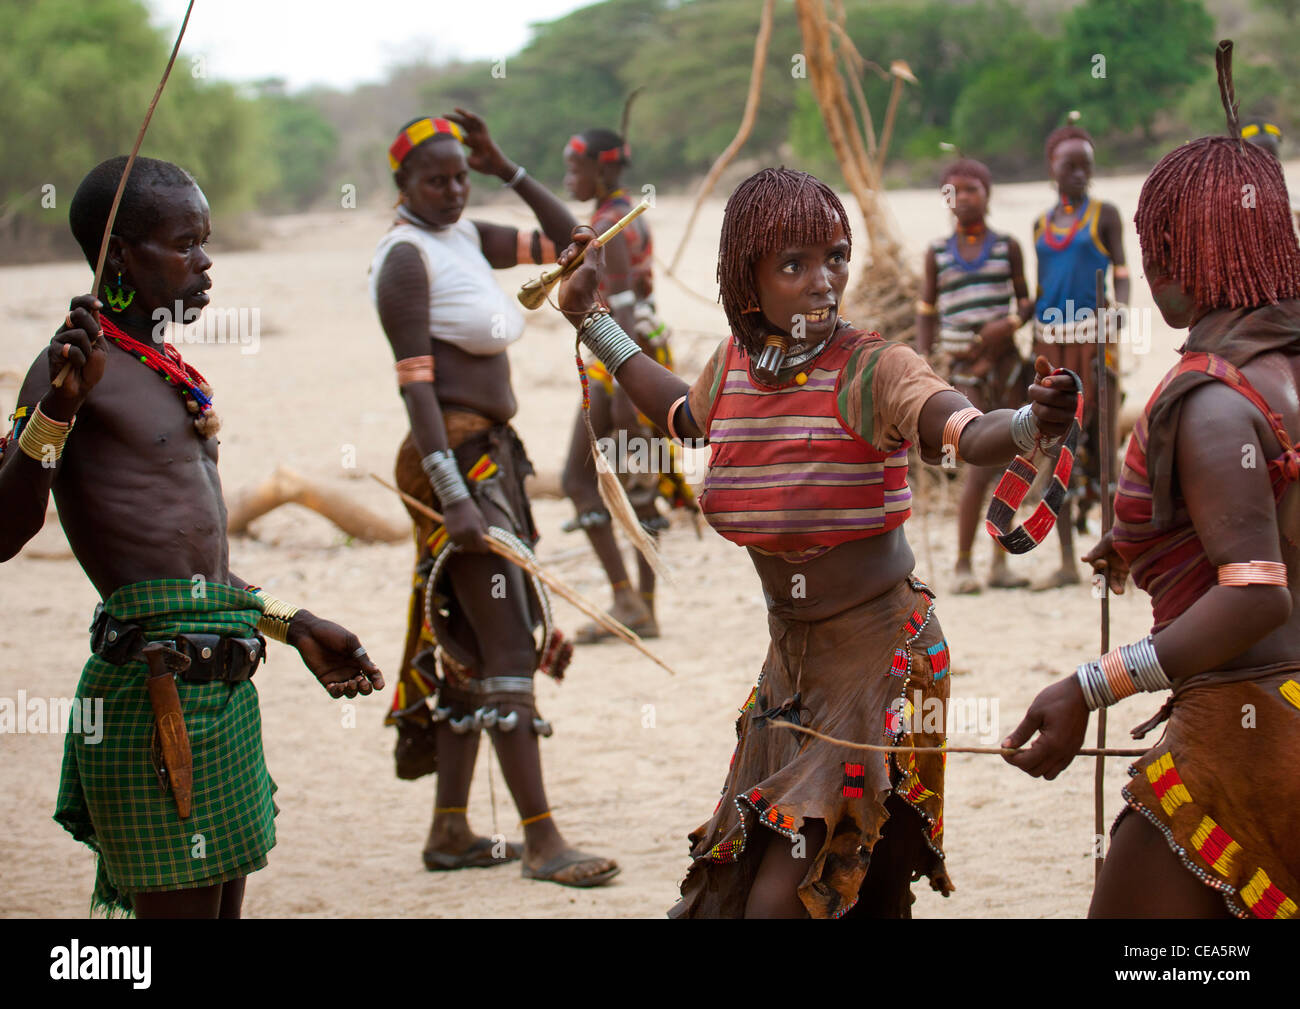 Hamer Woman Getting Flogged By The Whipper During Celebration Of Bull Jumping Ceremony Ethiopia Stock Photo